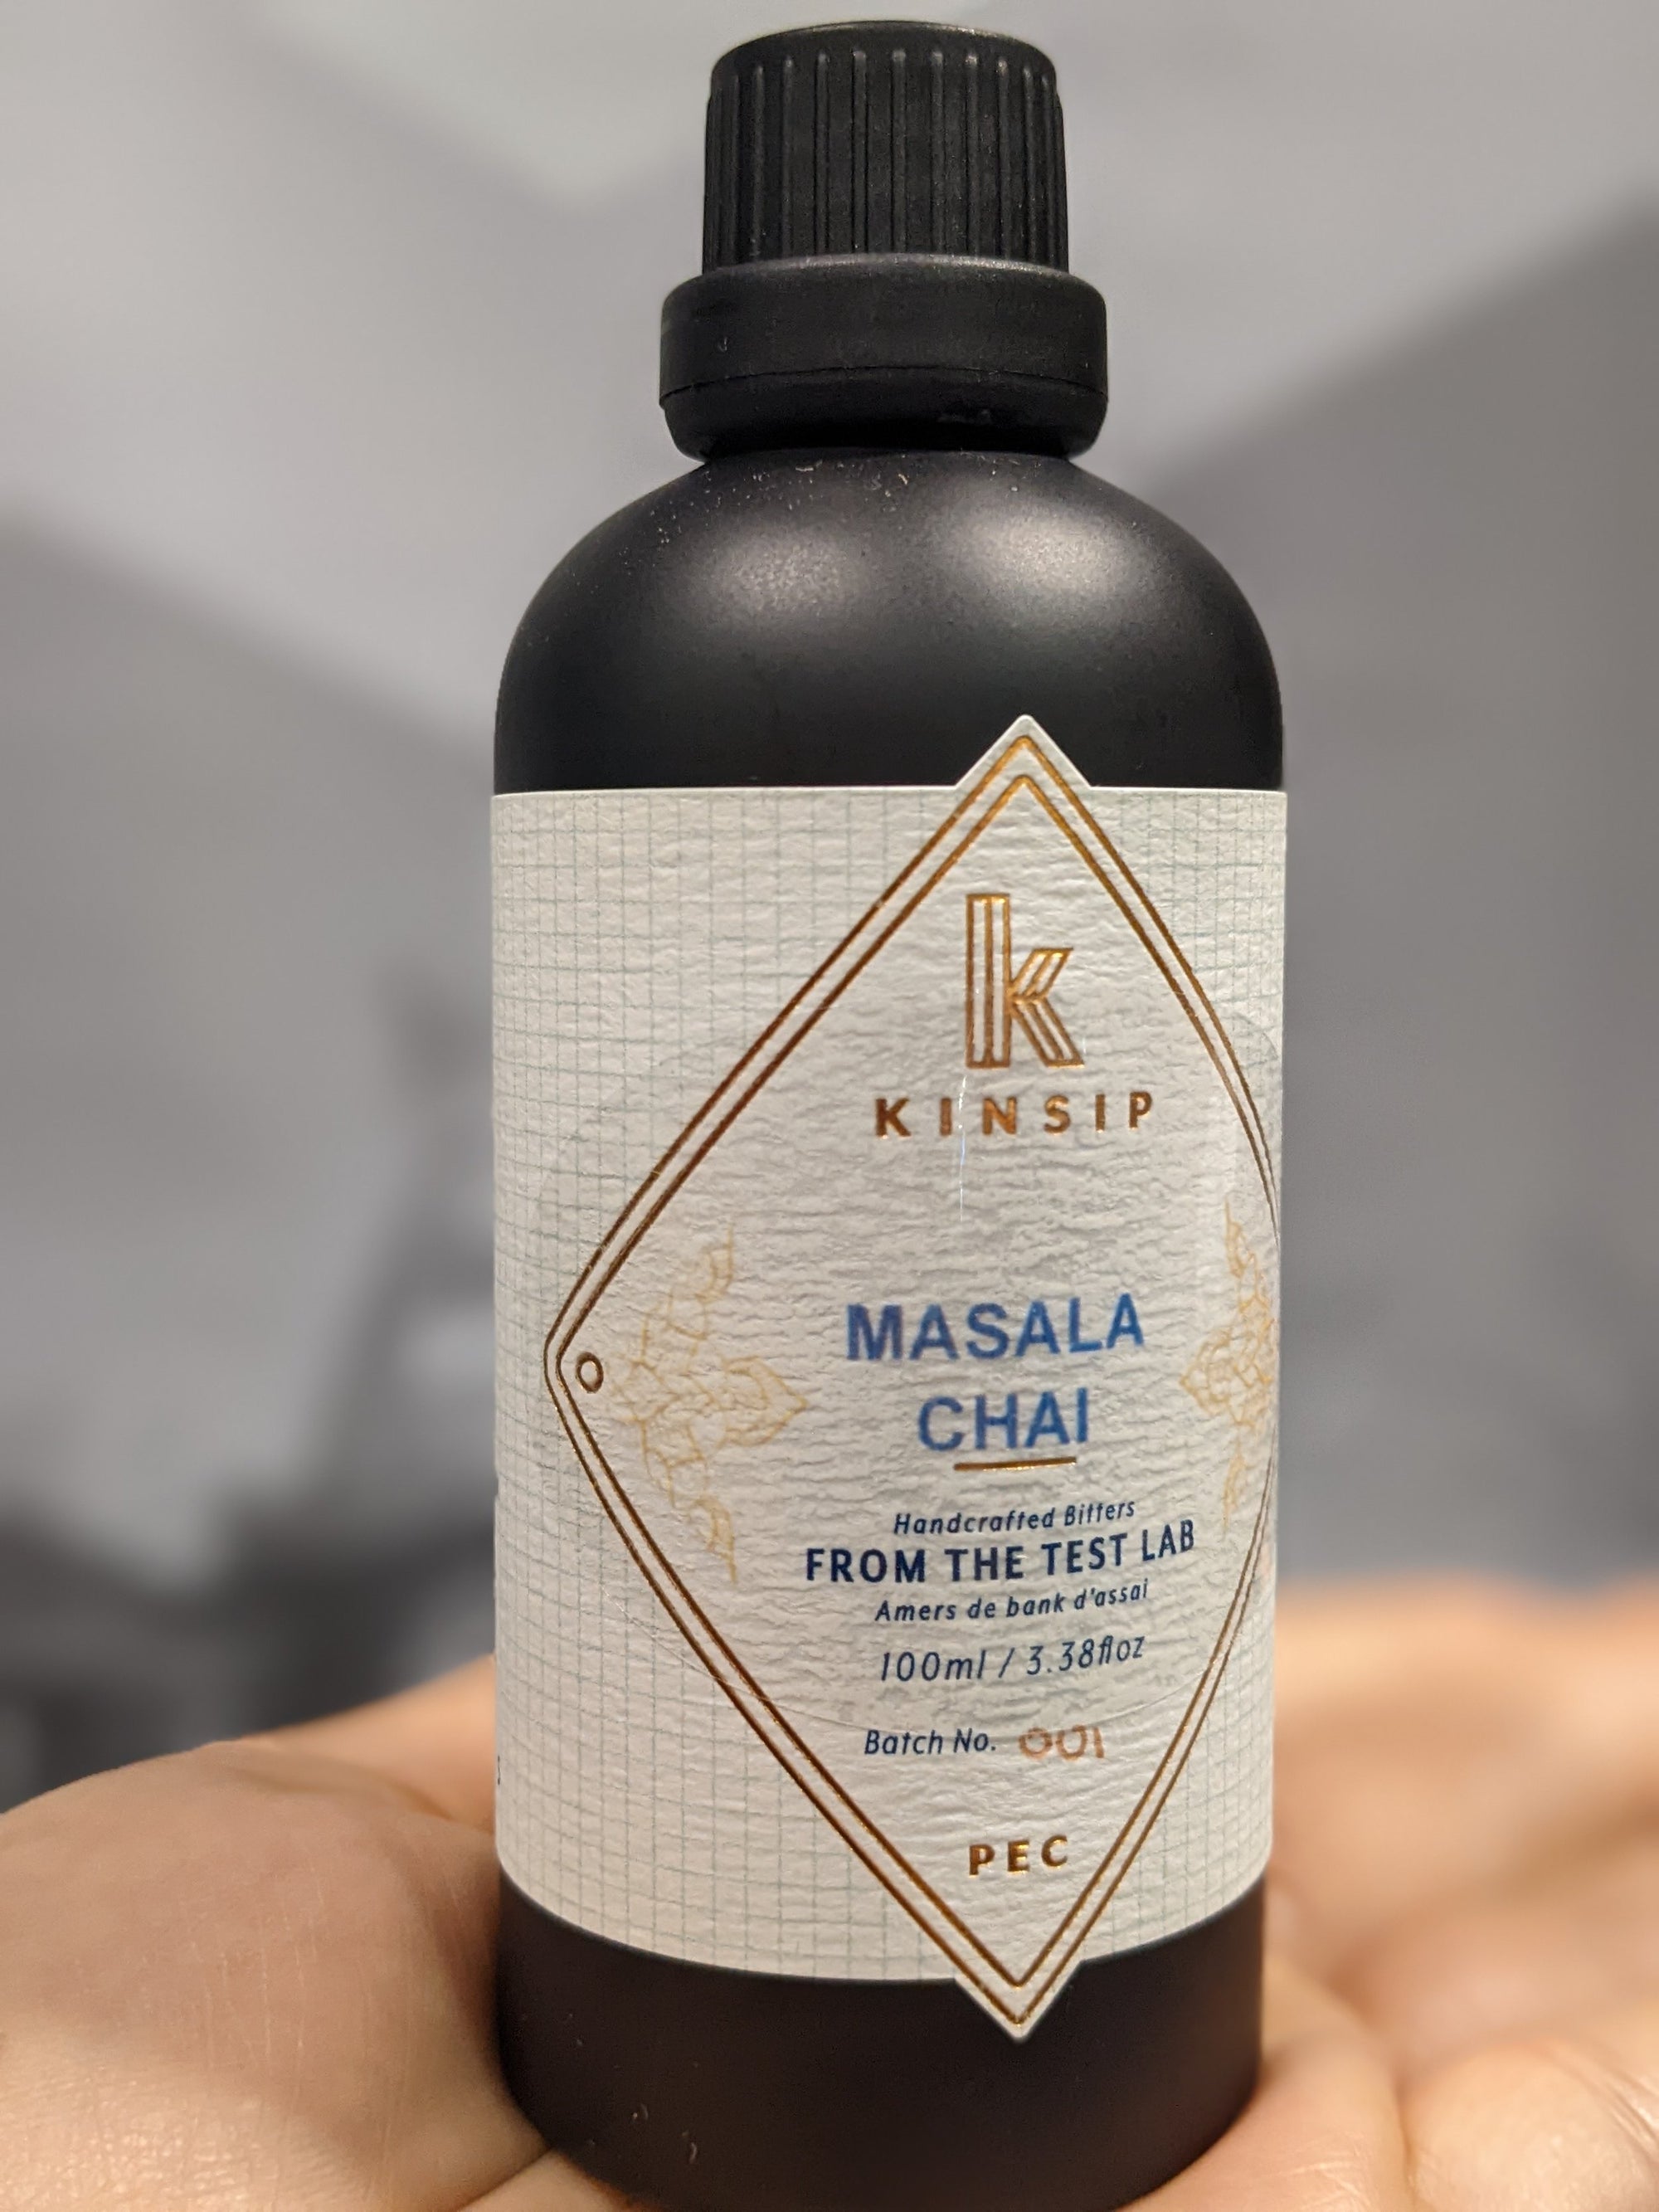 Masala Chai Handcrafted Bitters